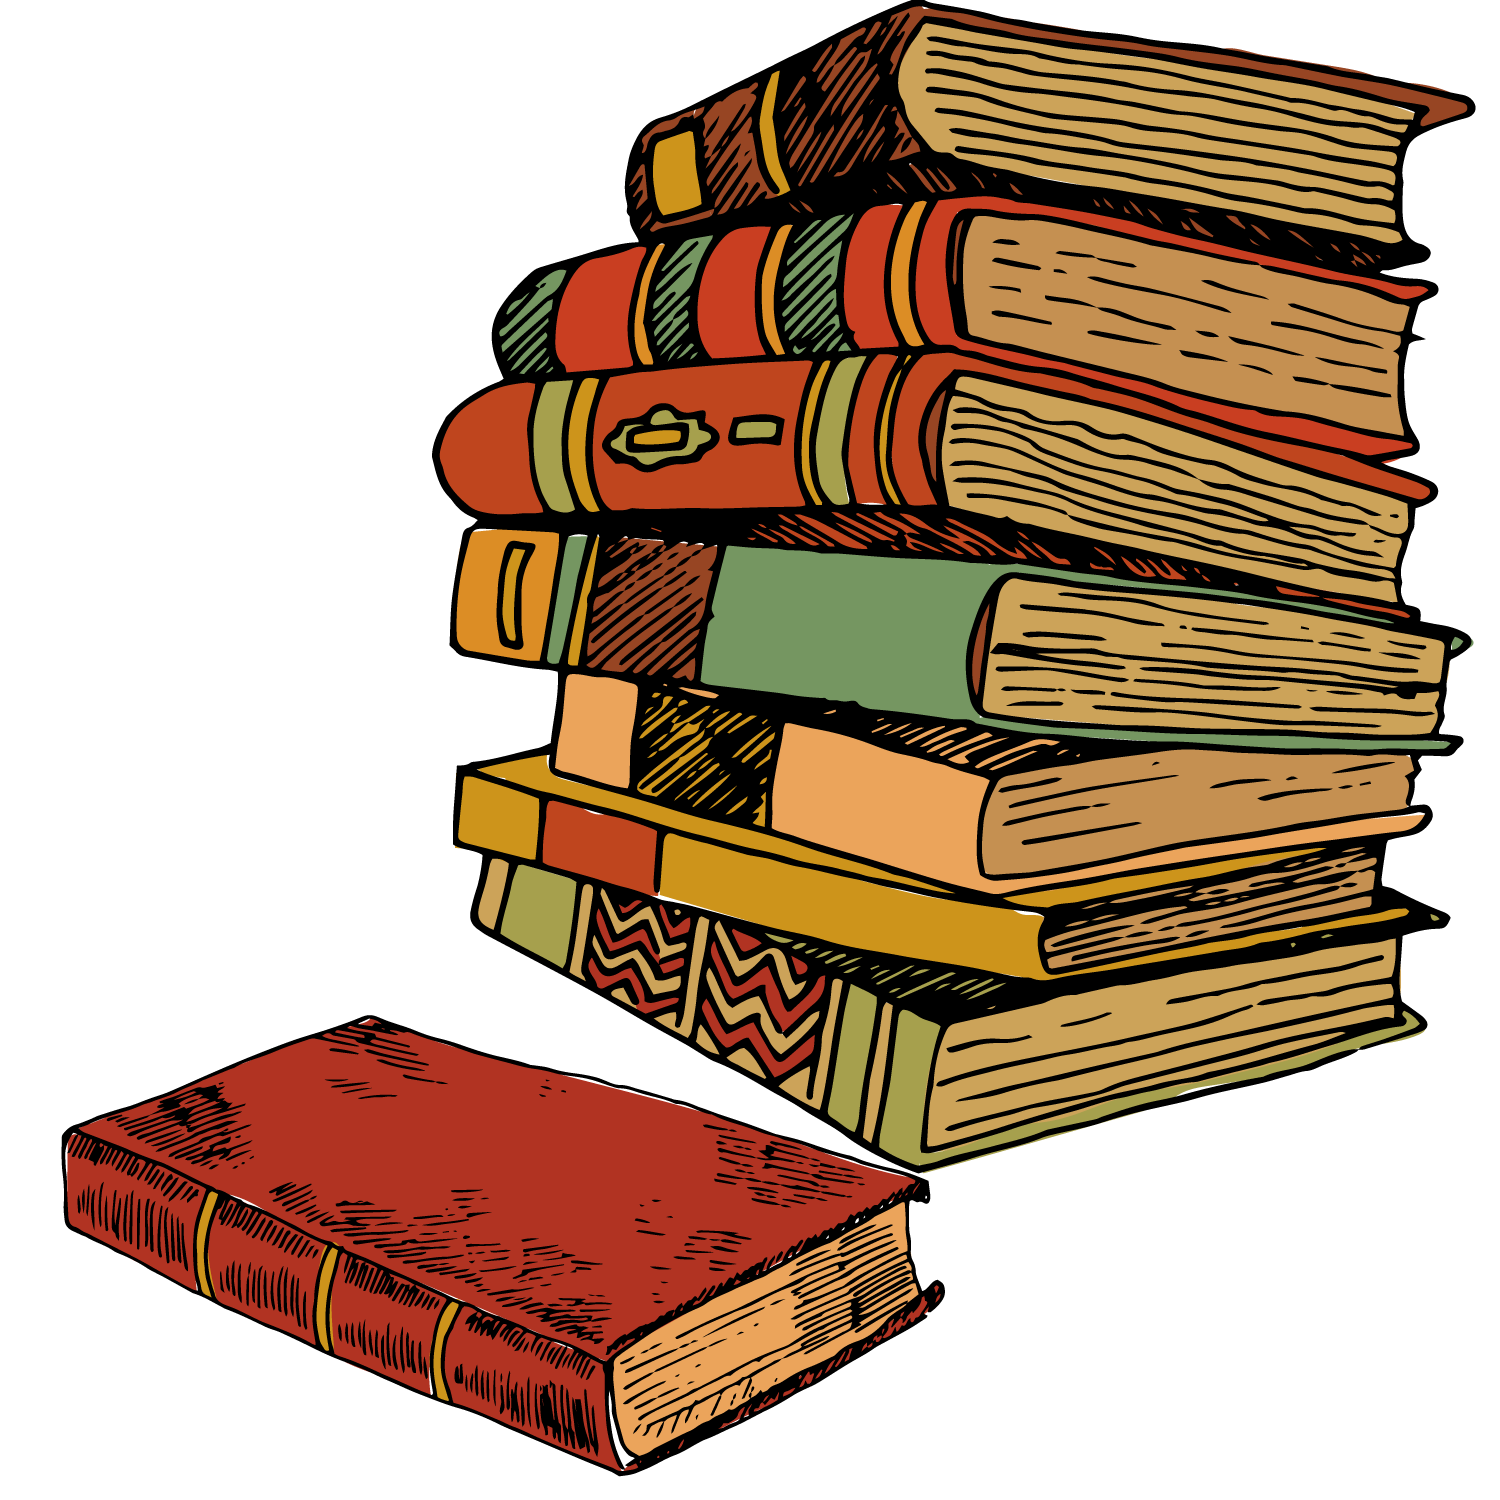 Paper Book Illustration - Ancient Books png download - 1500*1500 - Free ...